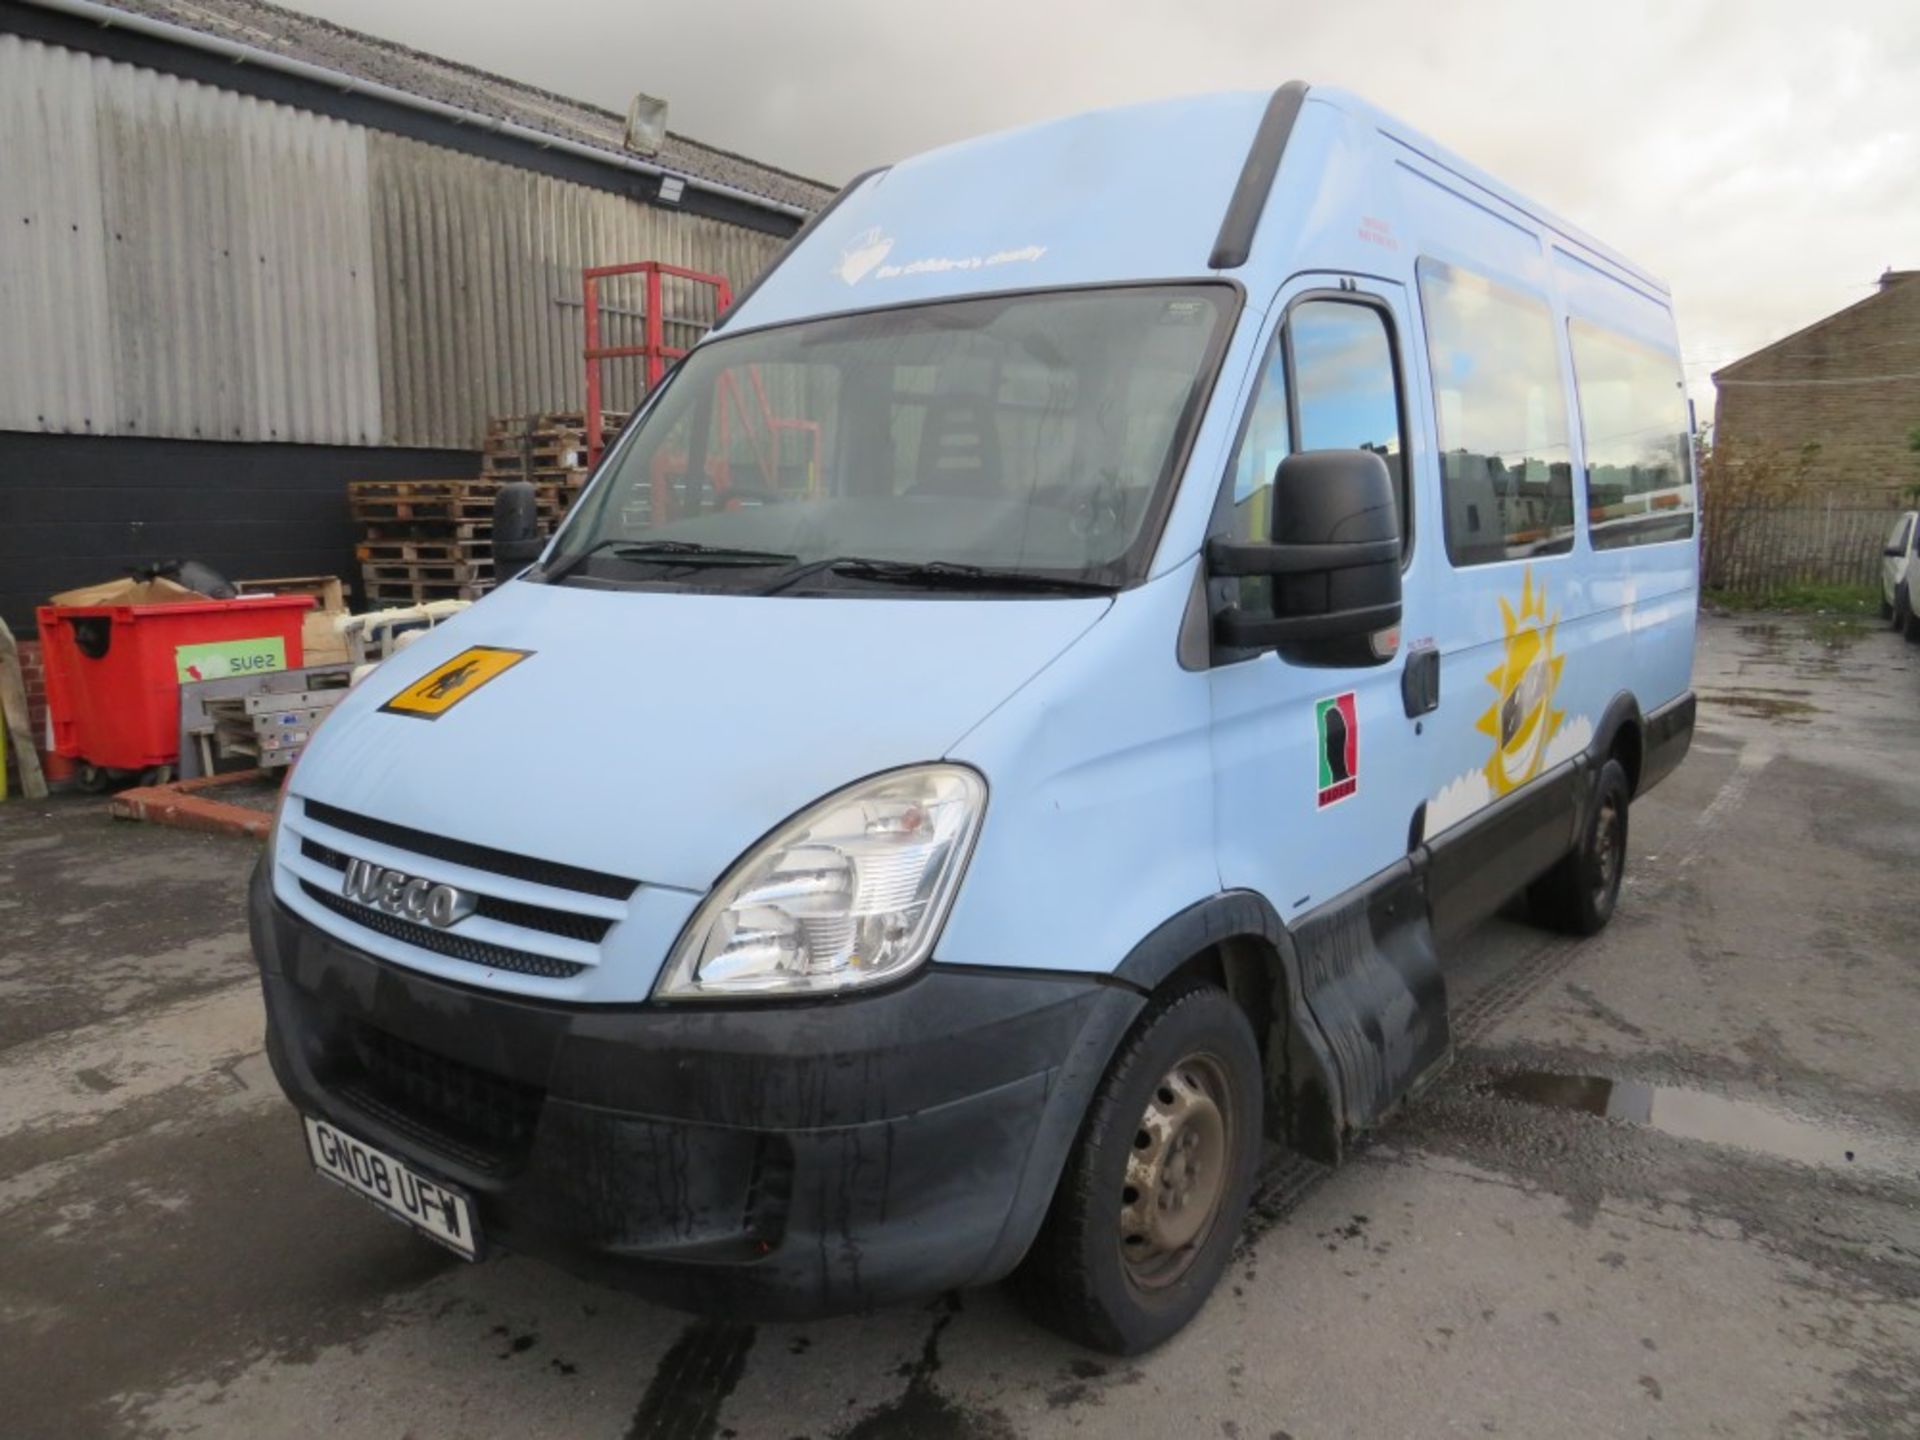 08 reg IVECO DAILY 35S12 MWB MINIBUS (DIRECT COUNCIL) 1ST REG 06/08, TEST 05/22, 63129M, V5 HERE, - Image 2 of 7